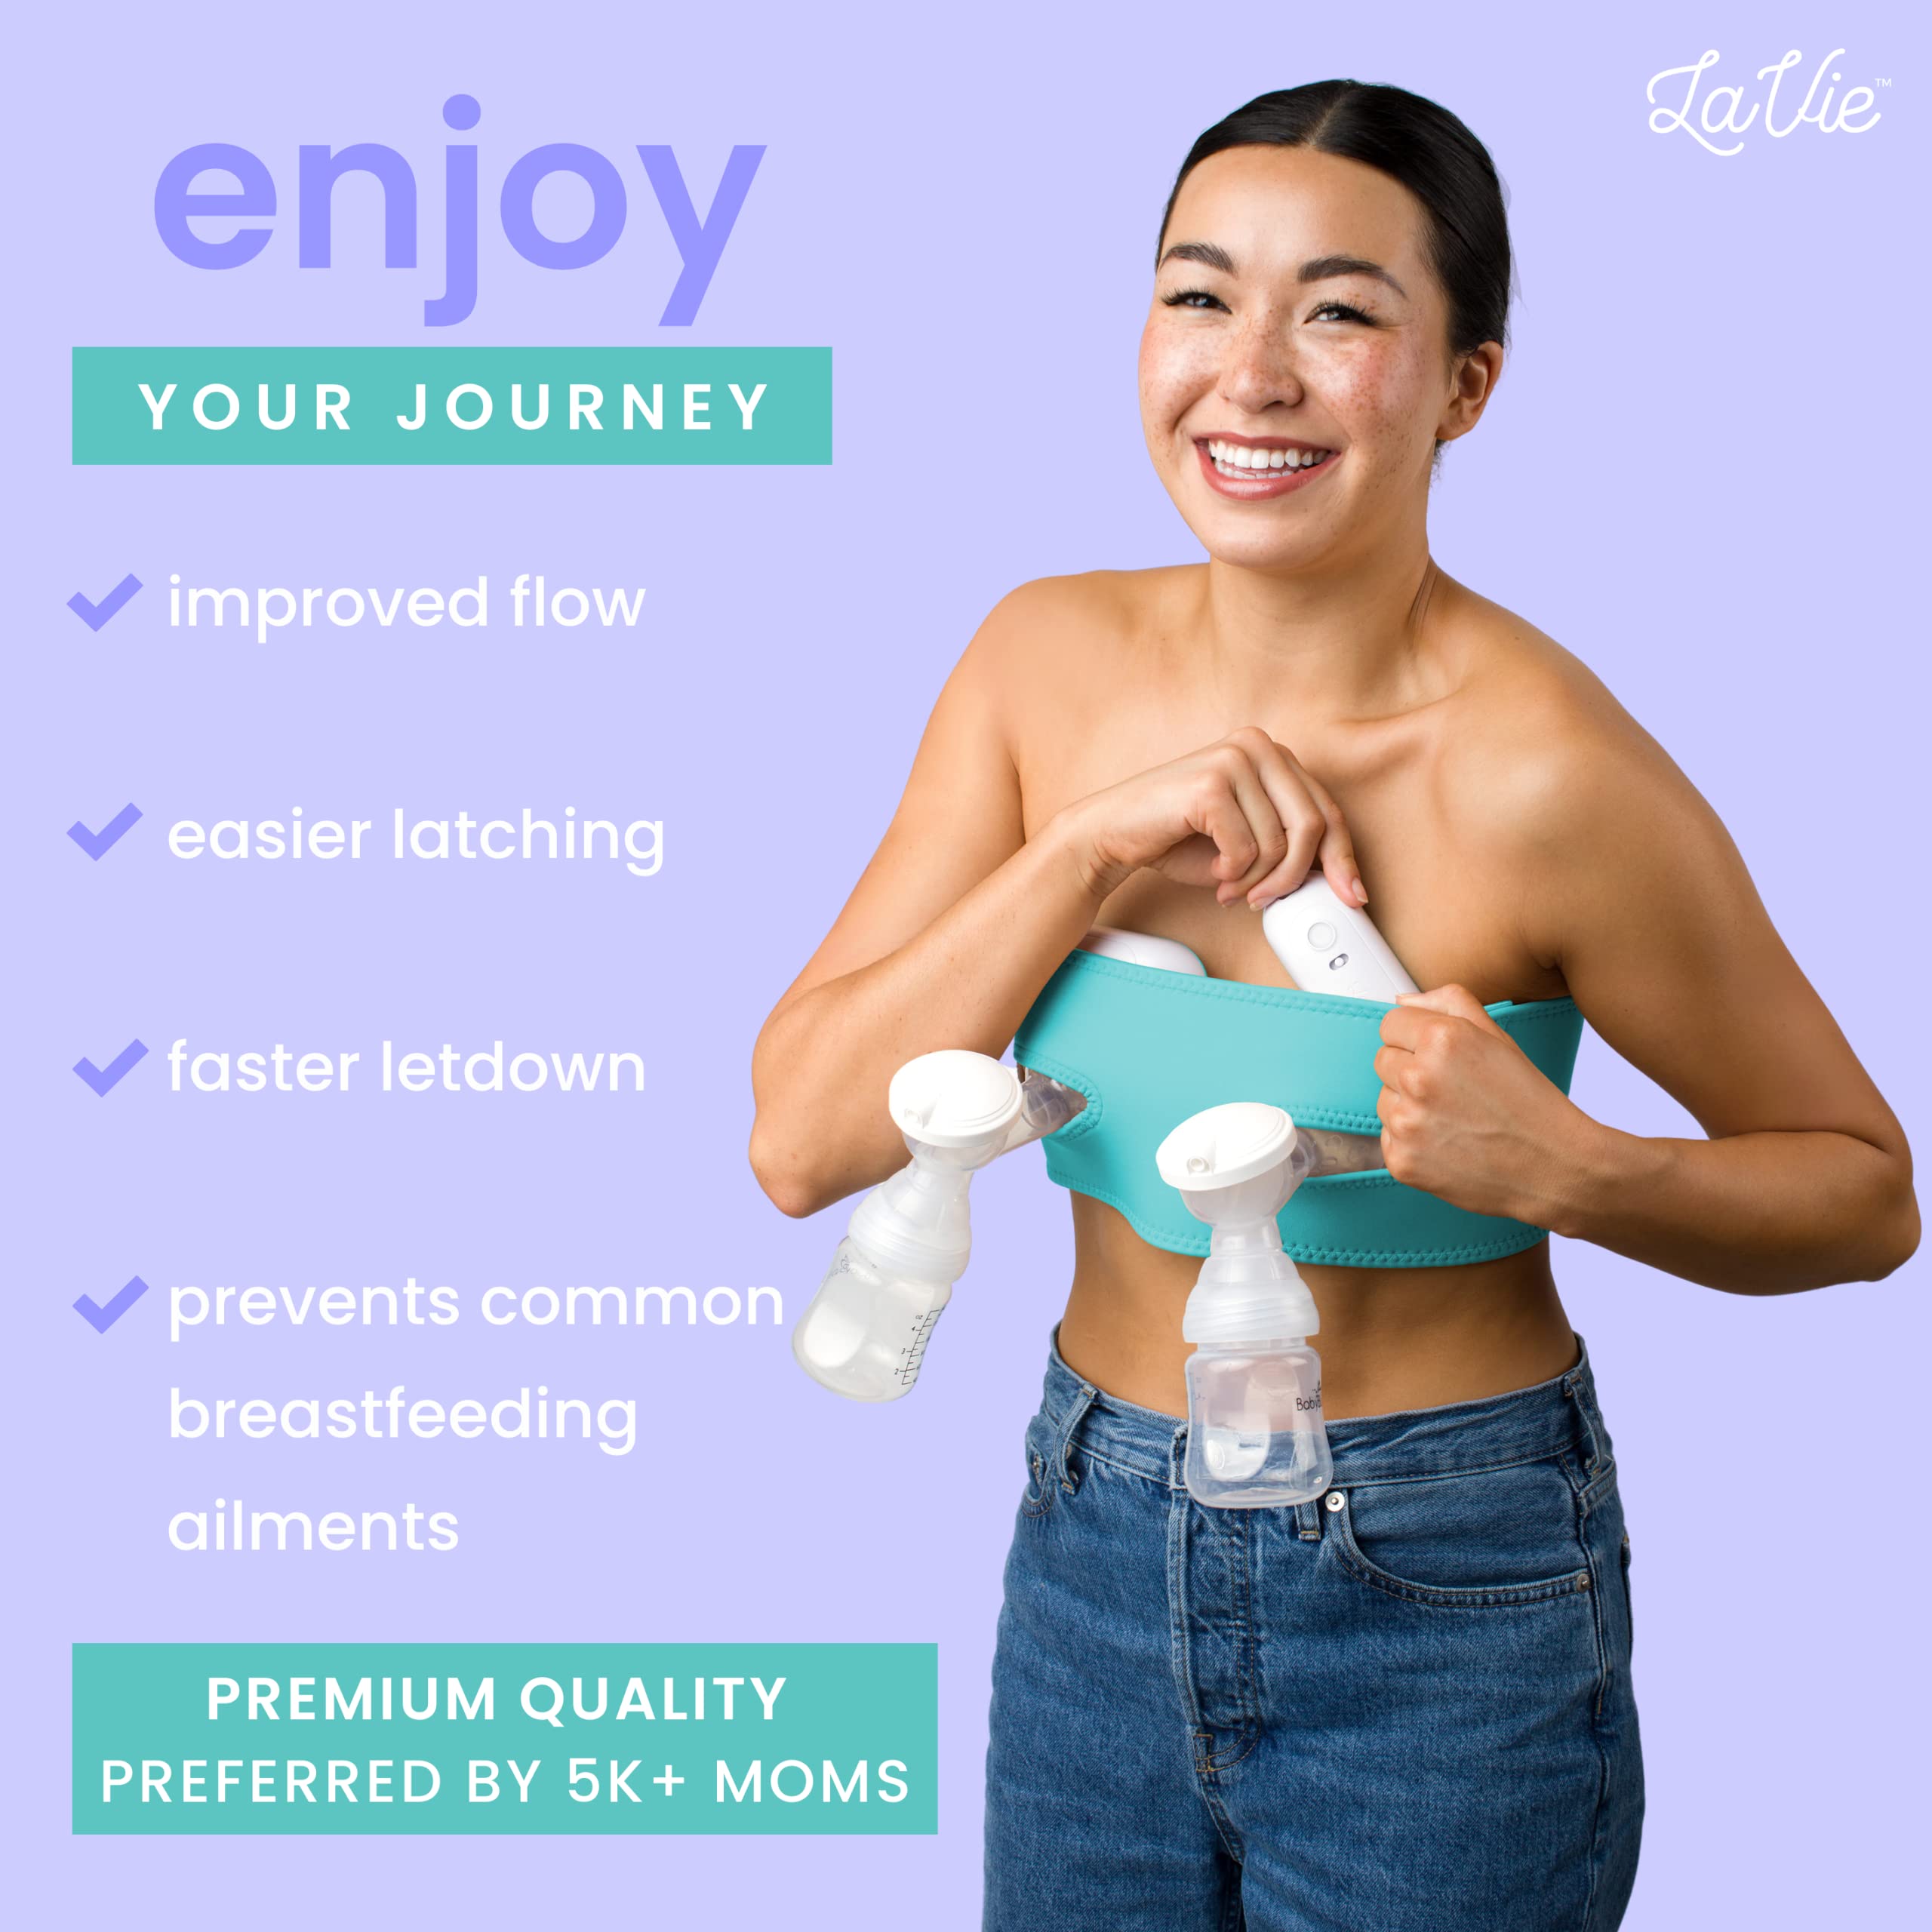 LaVie The 3-in-1 Warming Lactation Massager Bundle with Pumping Bra for Handsfree Breastfeeding, Nursing or Pumping, Essential Support for Clogged Ducts, Mastitis, and Engorgement